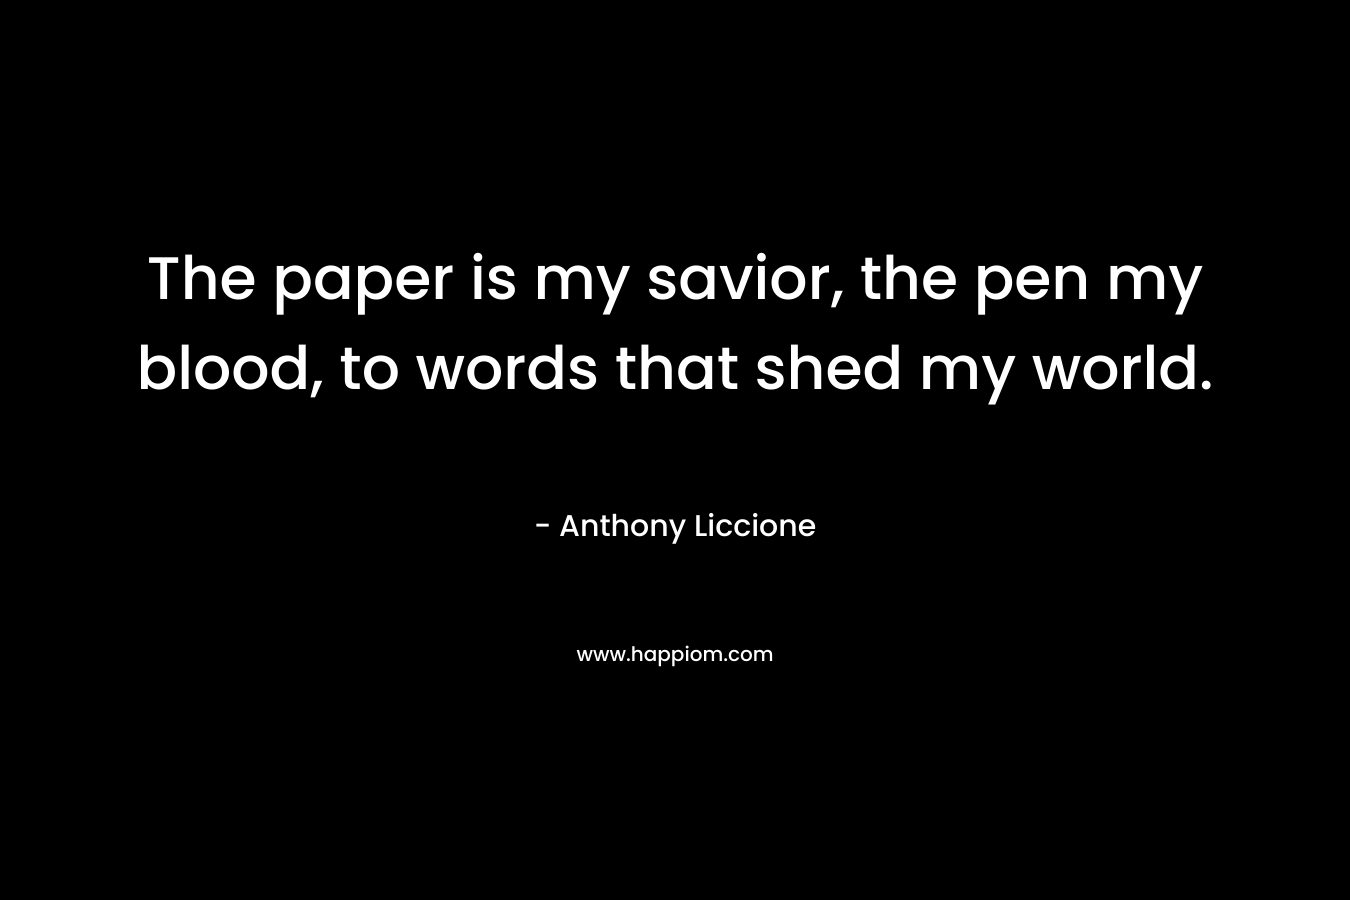 The paper is my savior, the pen my blood, to words that shed my world.